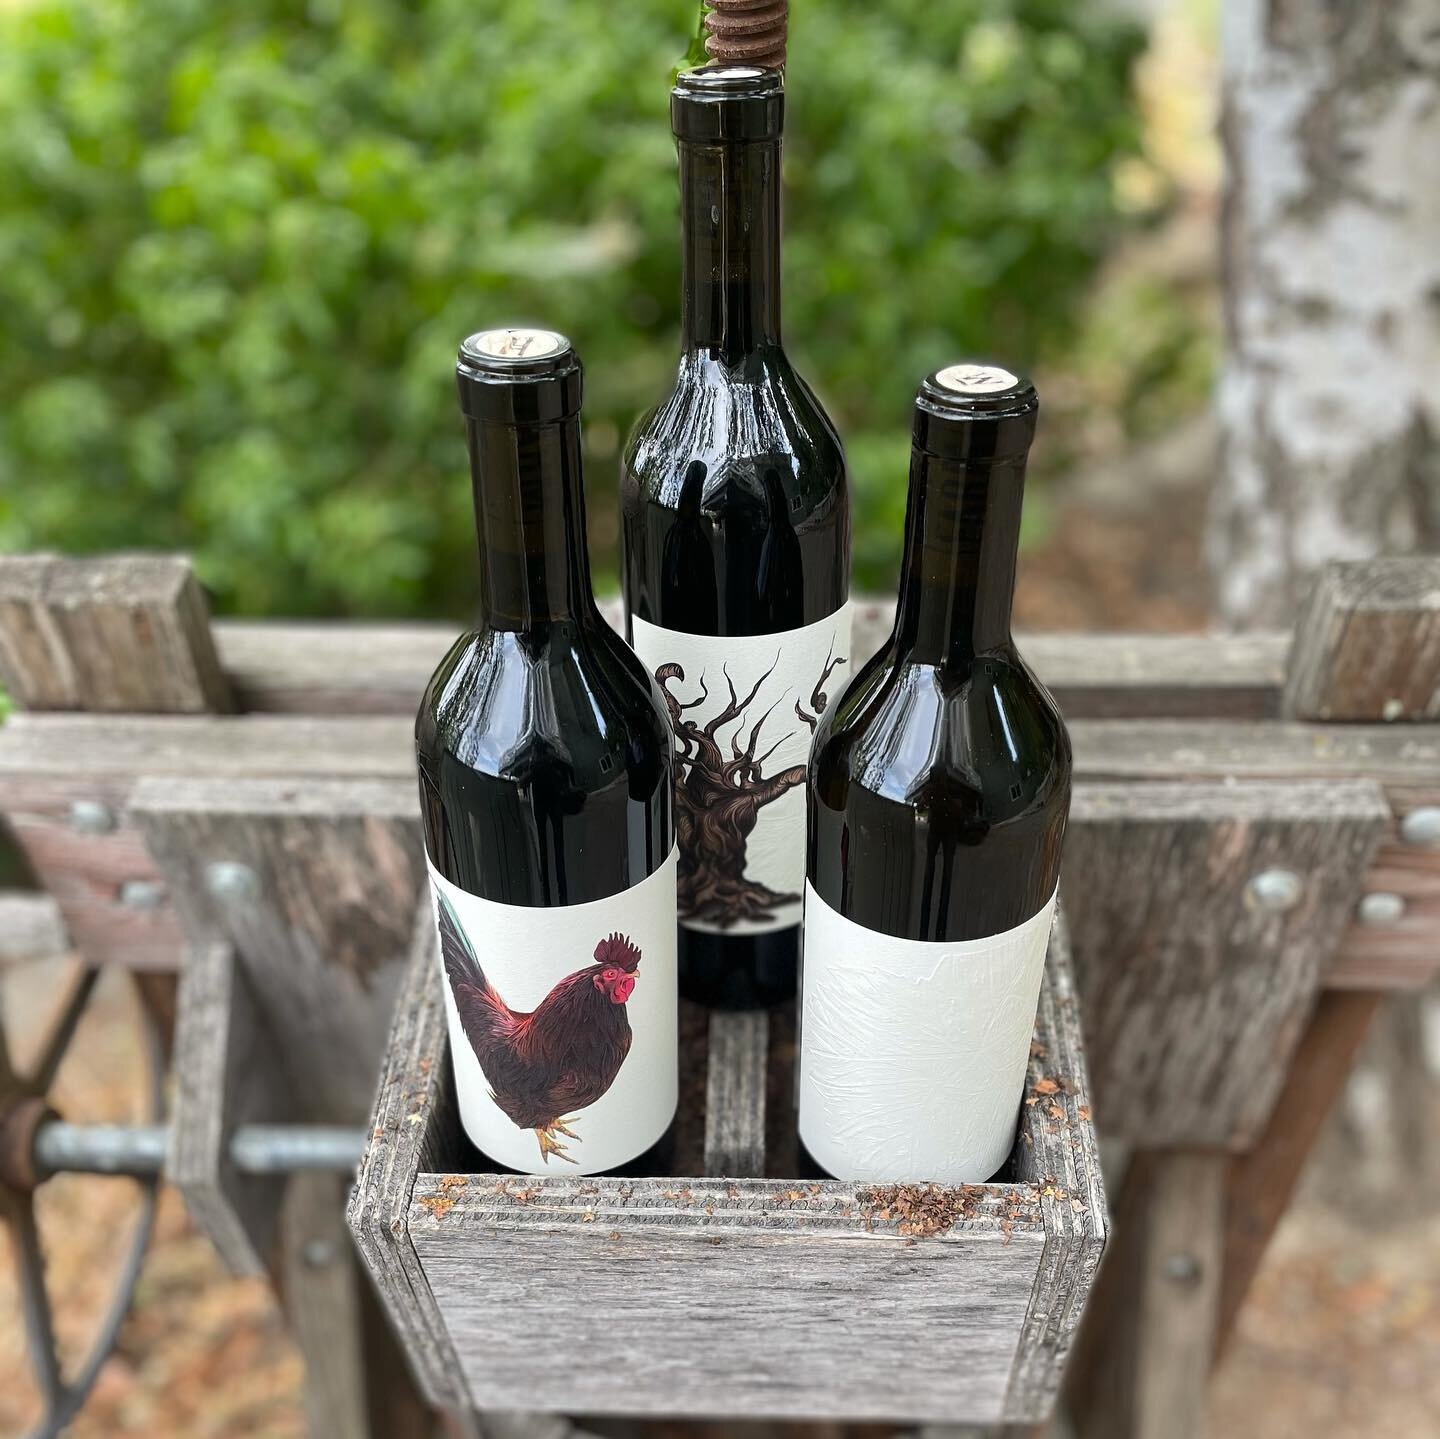 Watch your inboxes tomorrow for info on the newest wines from the Royal Nonesuch Farm. In addition to the 2019 Royal Nonesuch Farm Red wine, we have 2 micro bottlings of 💯% Grenache and 💯% Clairette Blanche for our members only.
 
Not a member? No 